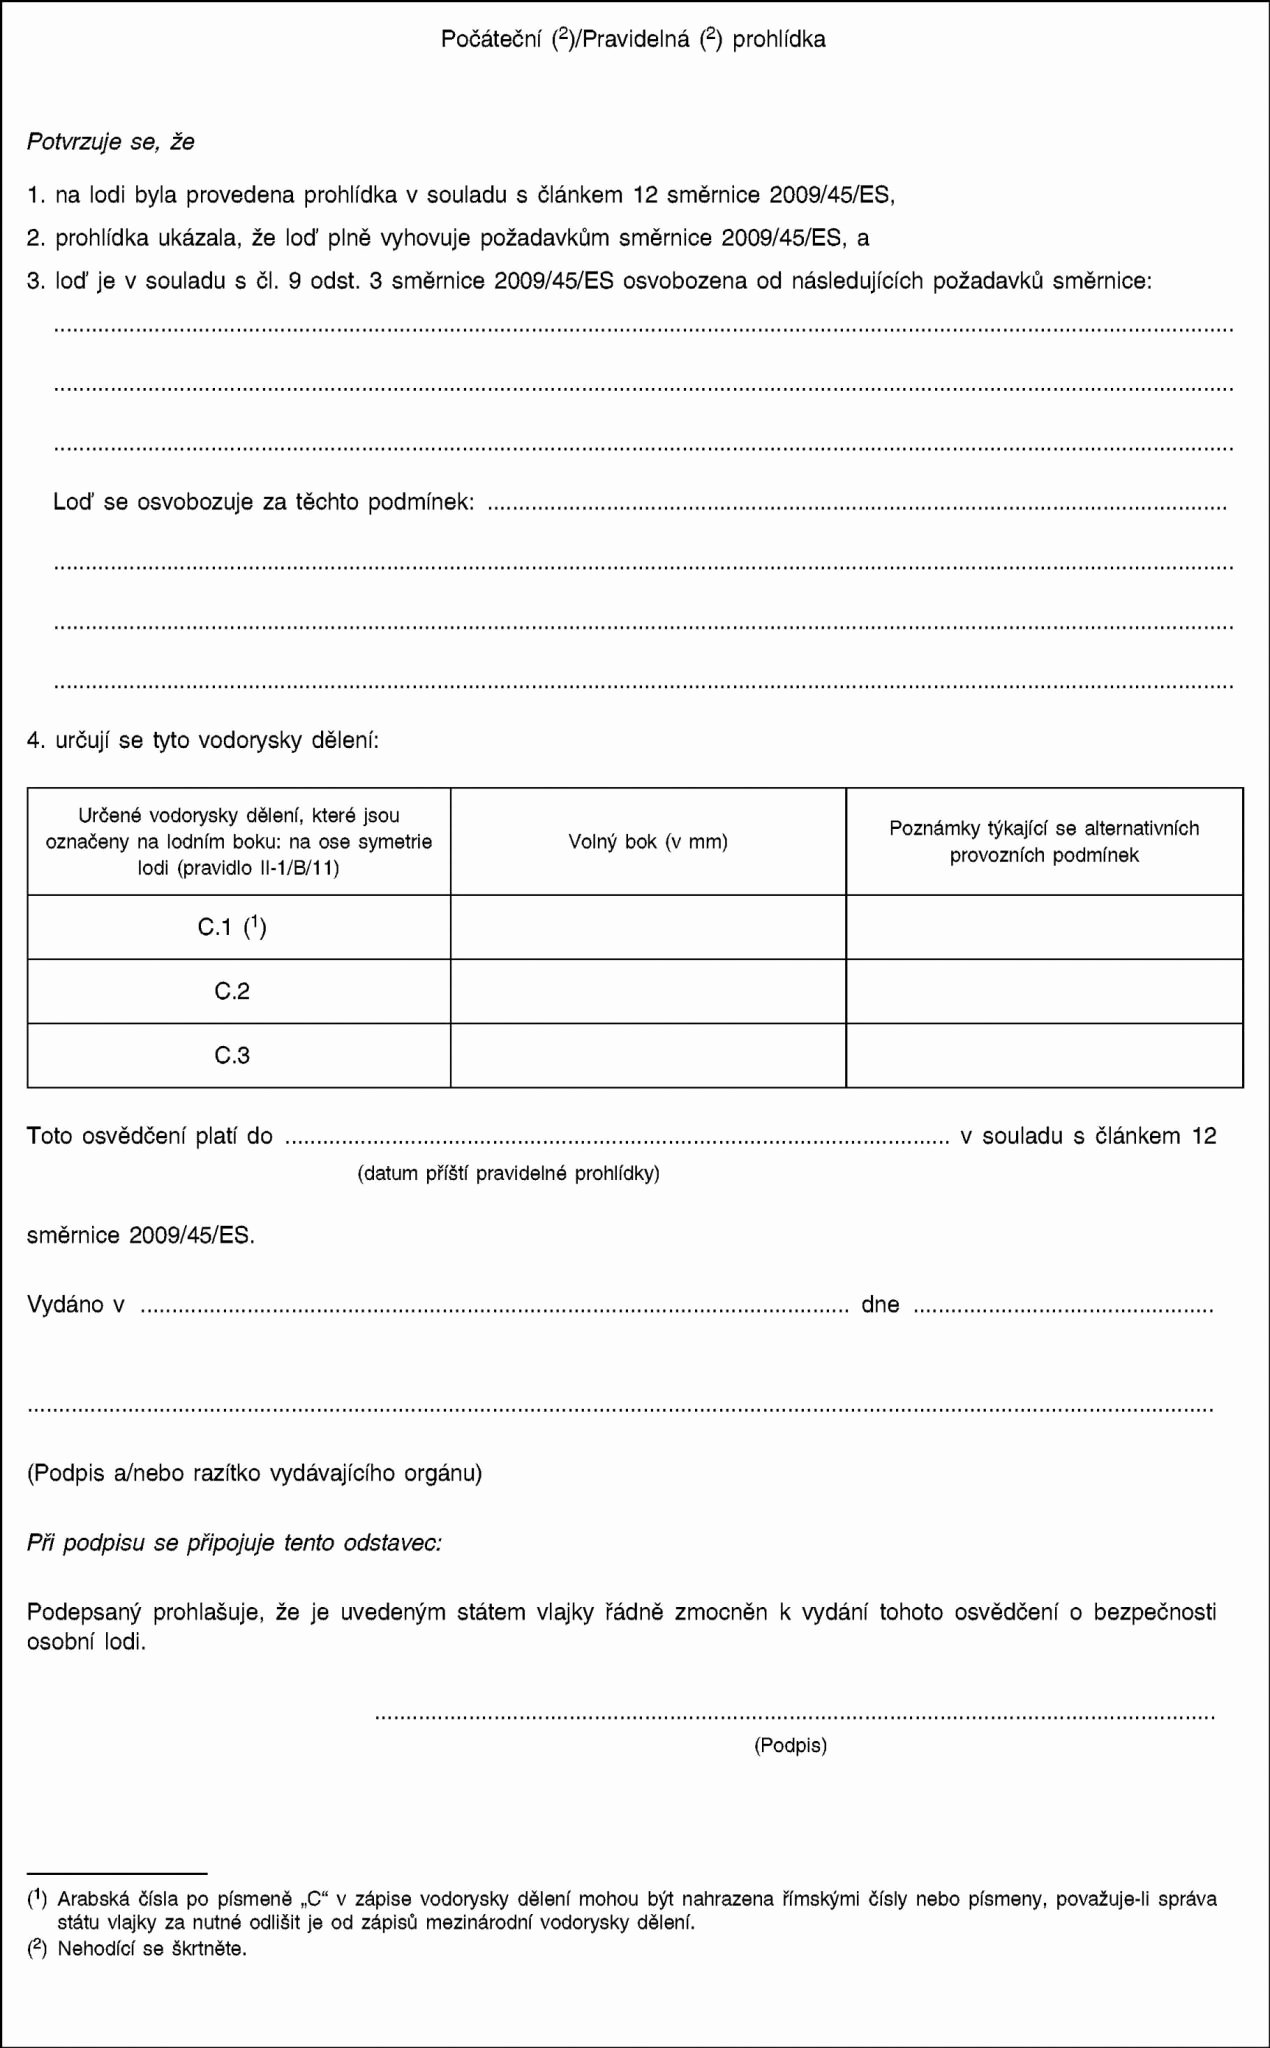 Constitutional Principles Worksheet Answers Unique Citizenship In the World Worksheet Answers